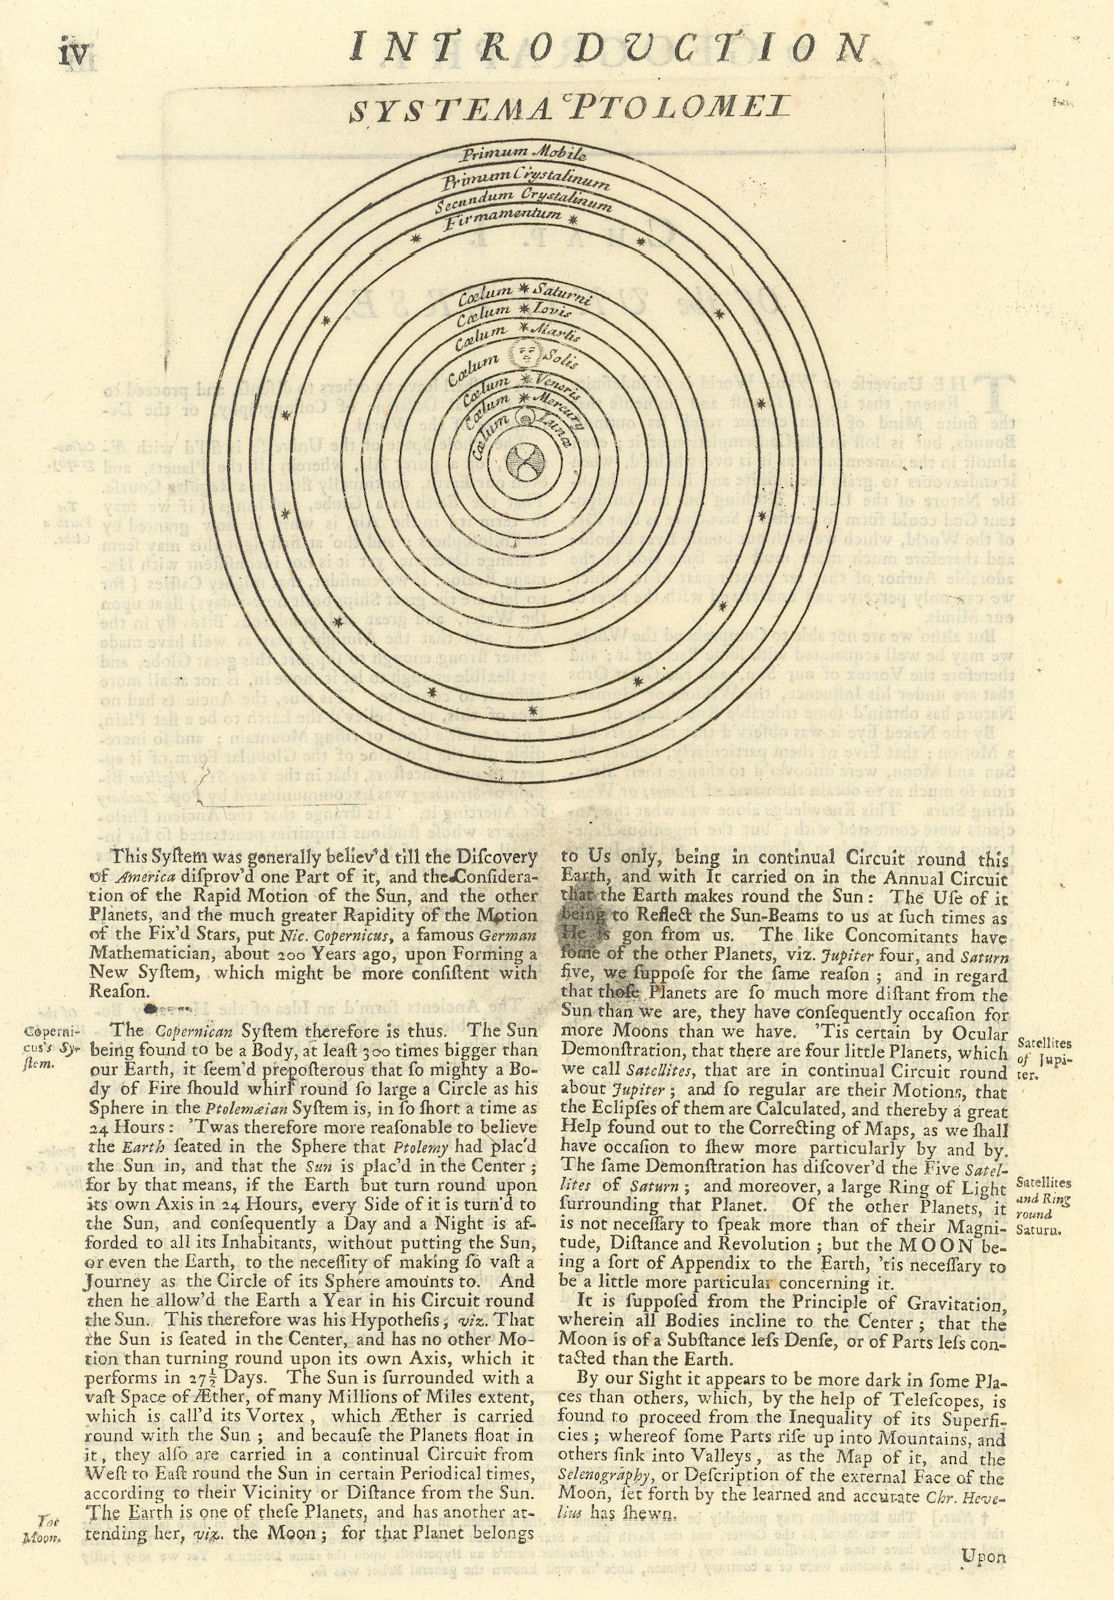 Associate Product Systema Ptolomei. Geocentric Solar system according to Ptolemy 1709 old print